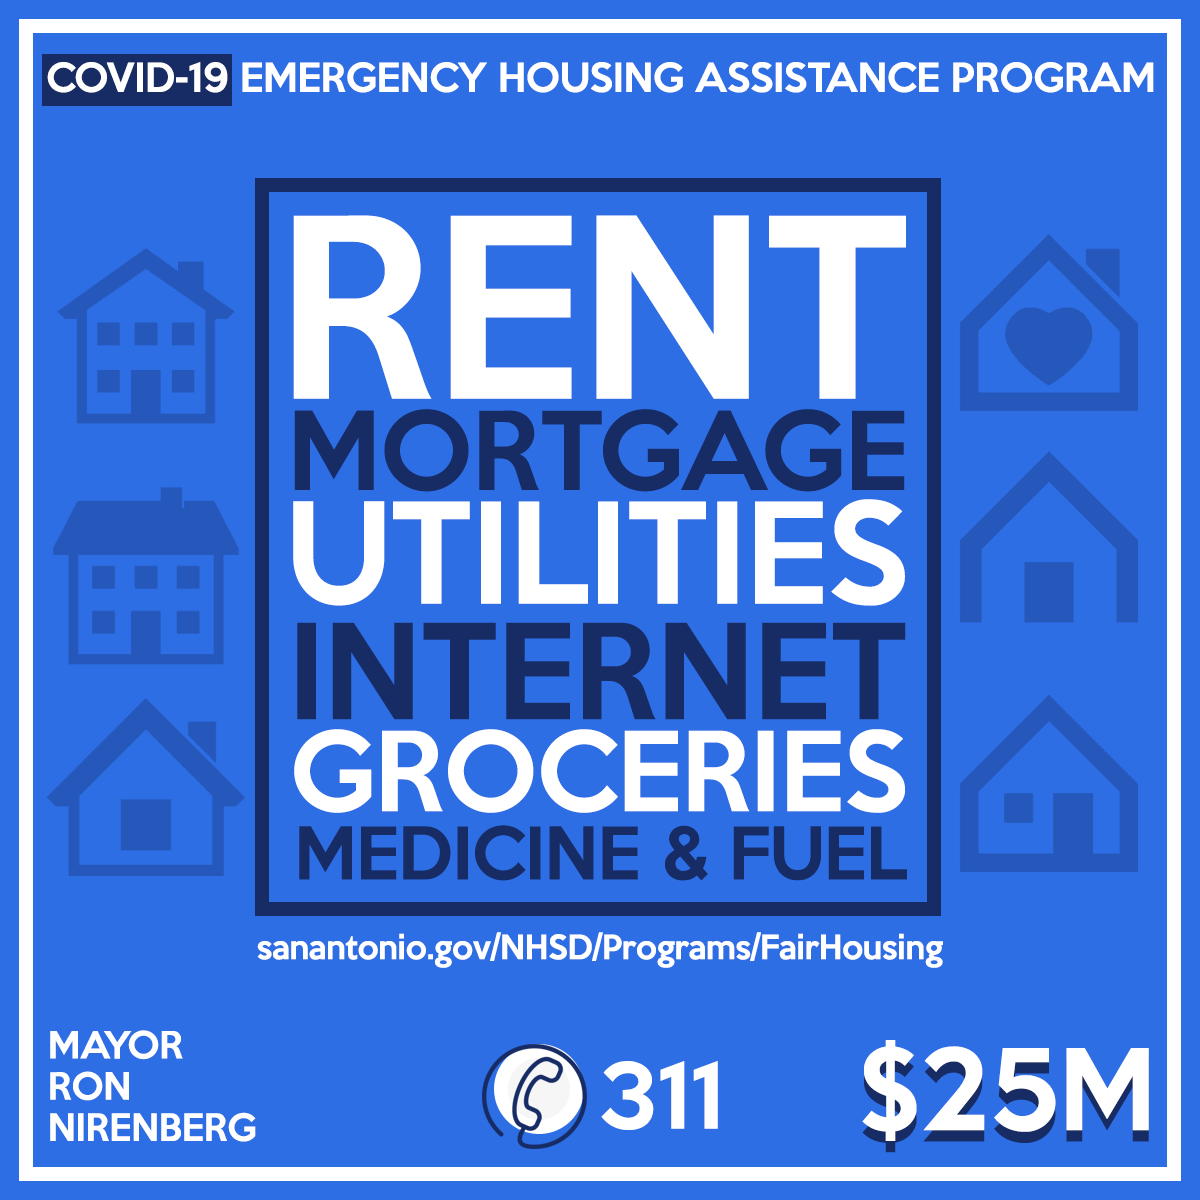 Council has approved the creation of a COVID-19 Emergency Housing Assistance Program, funded with $25 million from various sources.Residents seeking assistance should visit:  https://sanantonio.gov/NHSD/Programs/FairHousing or call 311Text HousingHelpSA to 41444 to donate to this fund.4/13